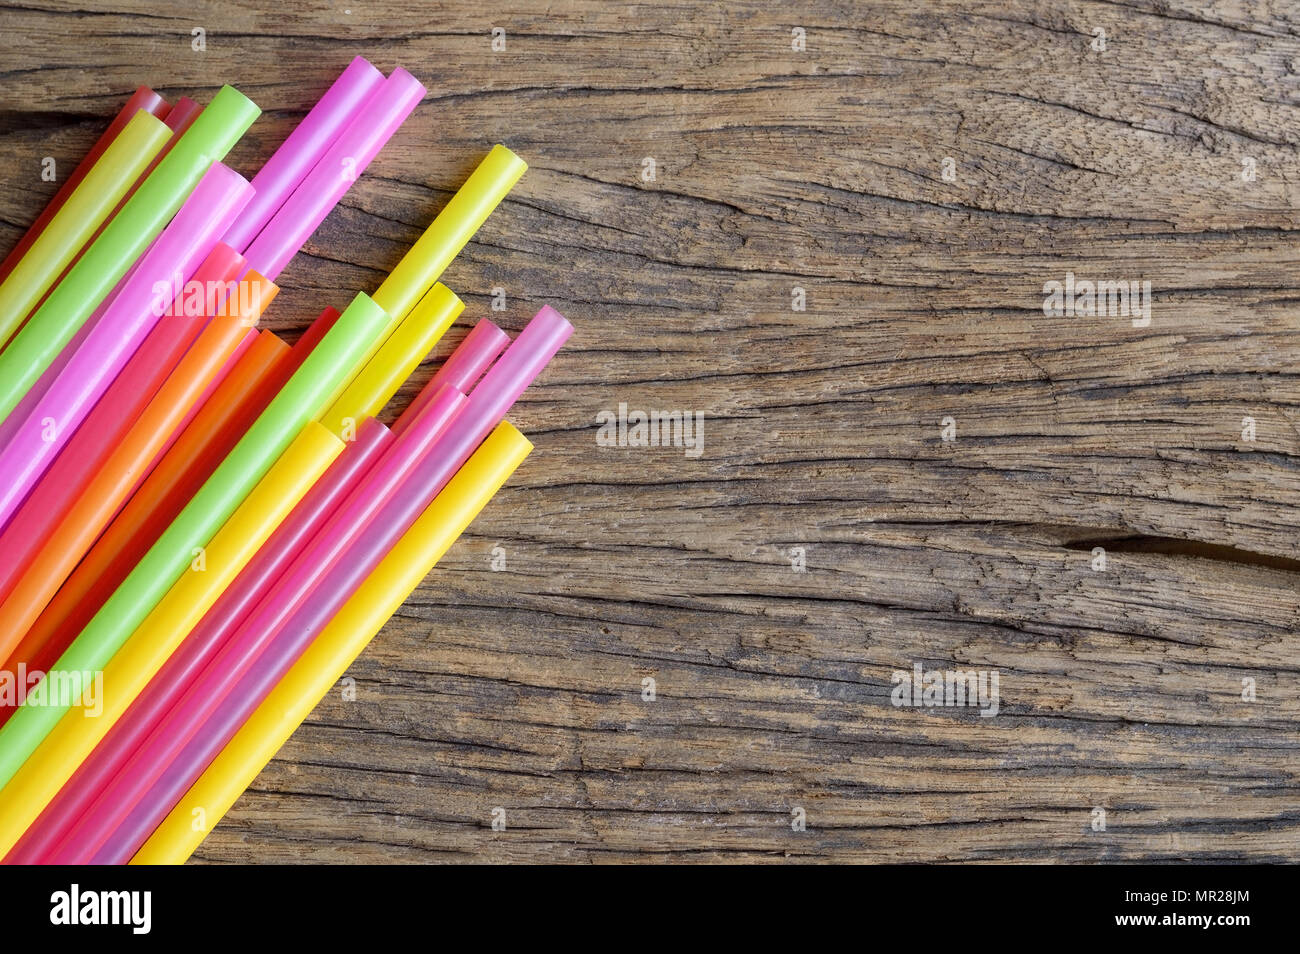 colorful plastic drinking straw on wooden background Stock Photo